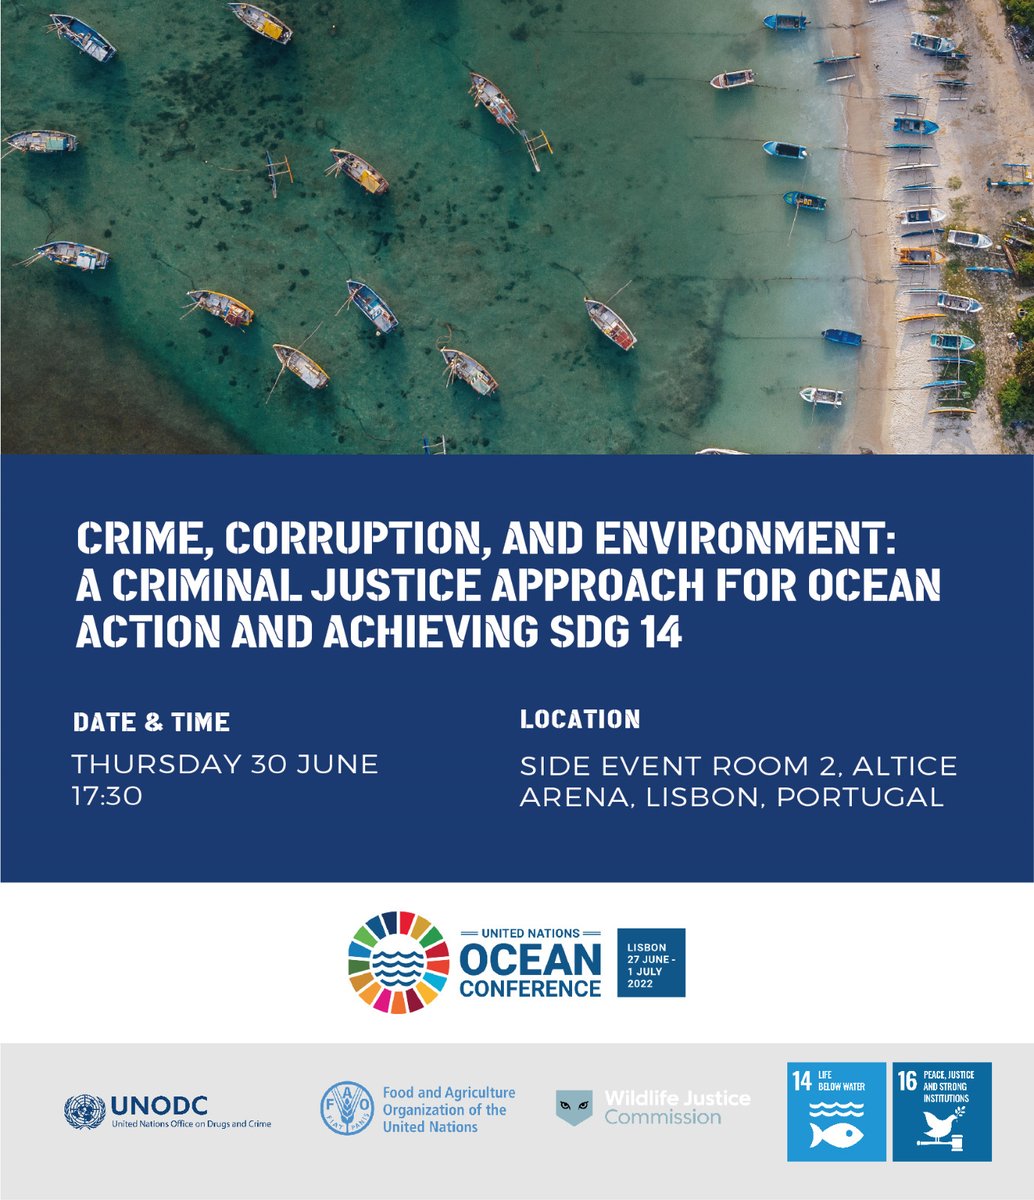 Will you be attending the #UNOceanConference in #Lisbon next week? 
If yes, come join our side event on crime, corruption and the #environment, where we’ll explore how a criminal justice approach can enhance ocean action and achieve #SDG14. #SaveOurOcean 🌊